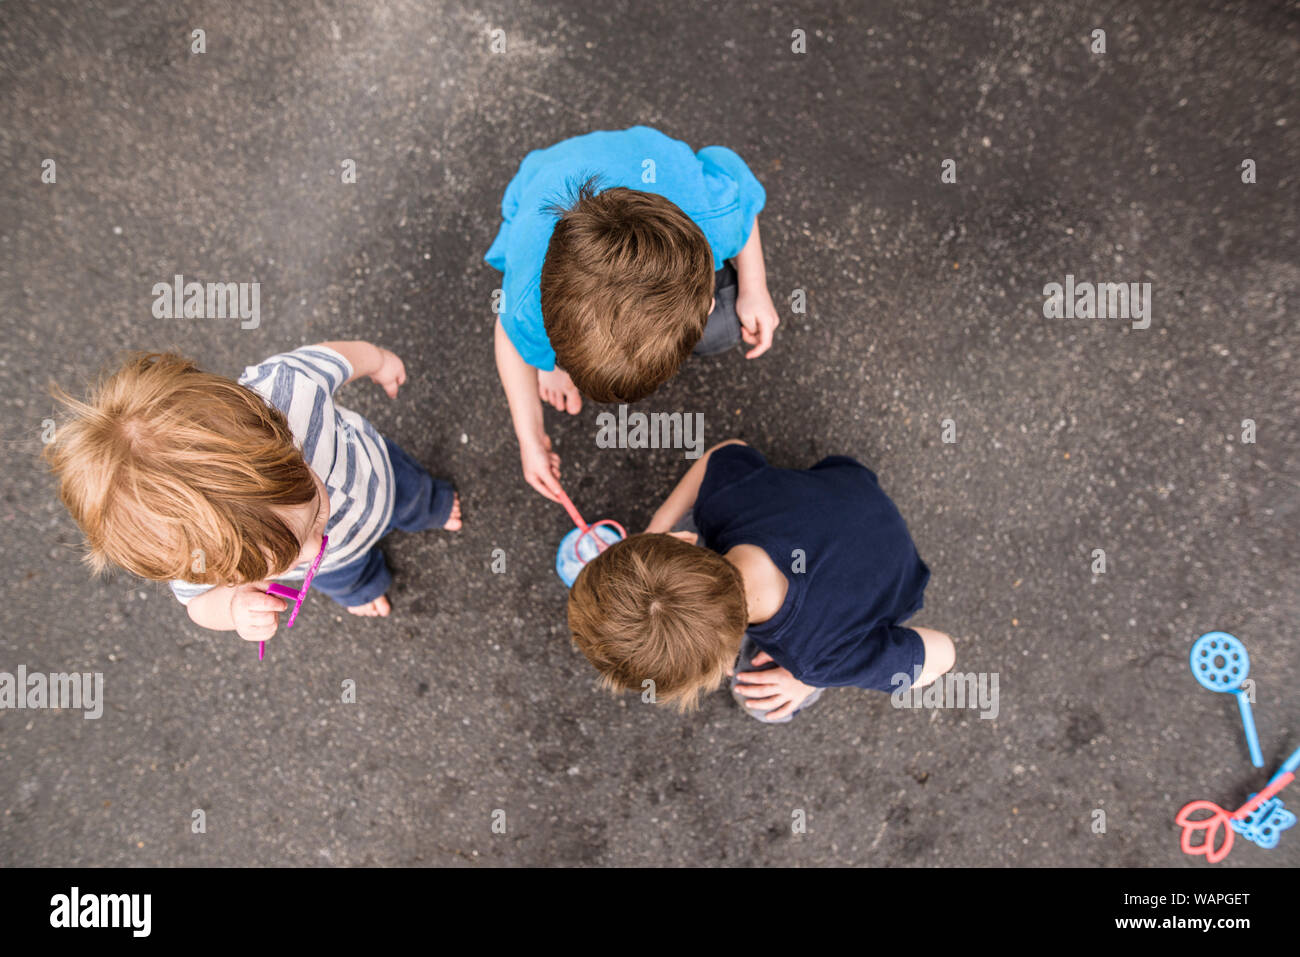 looking down on three boys playing outside with bubbles Stock Photo